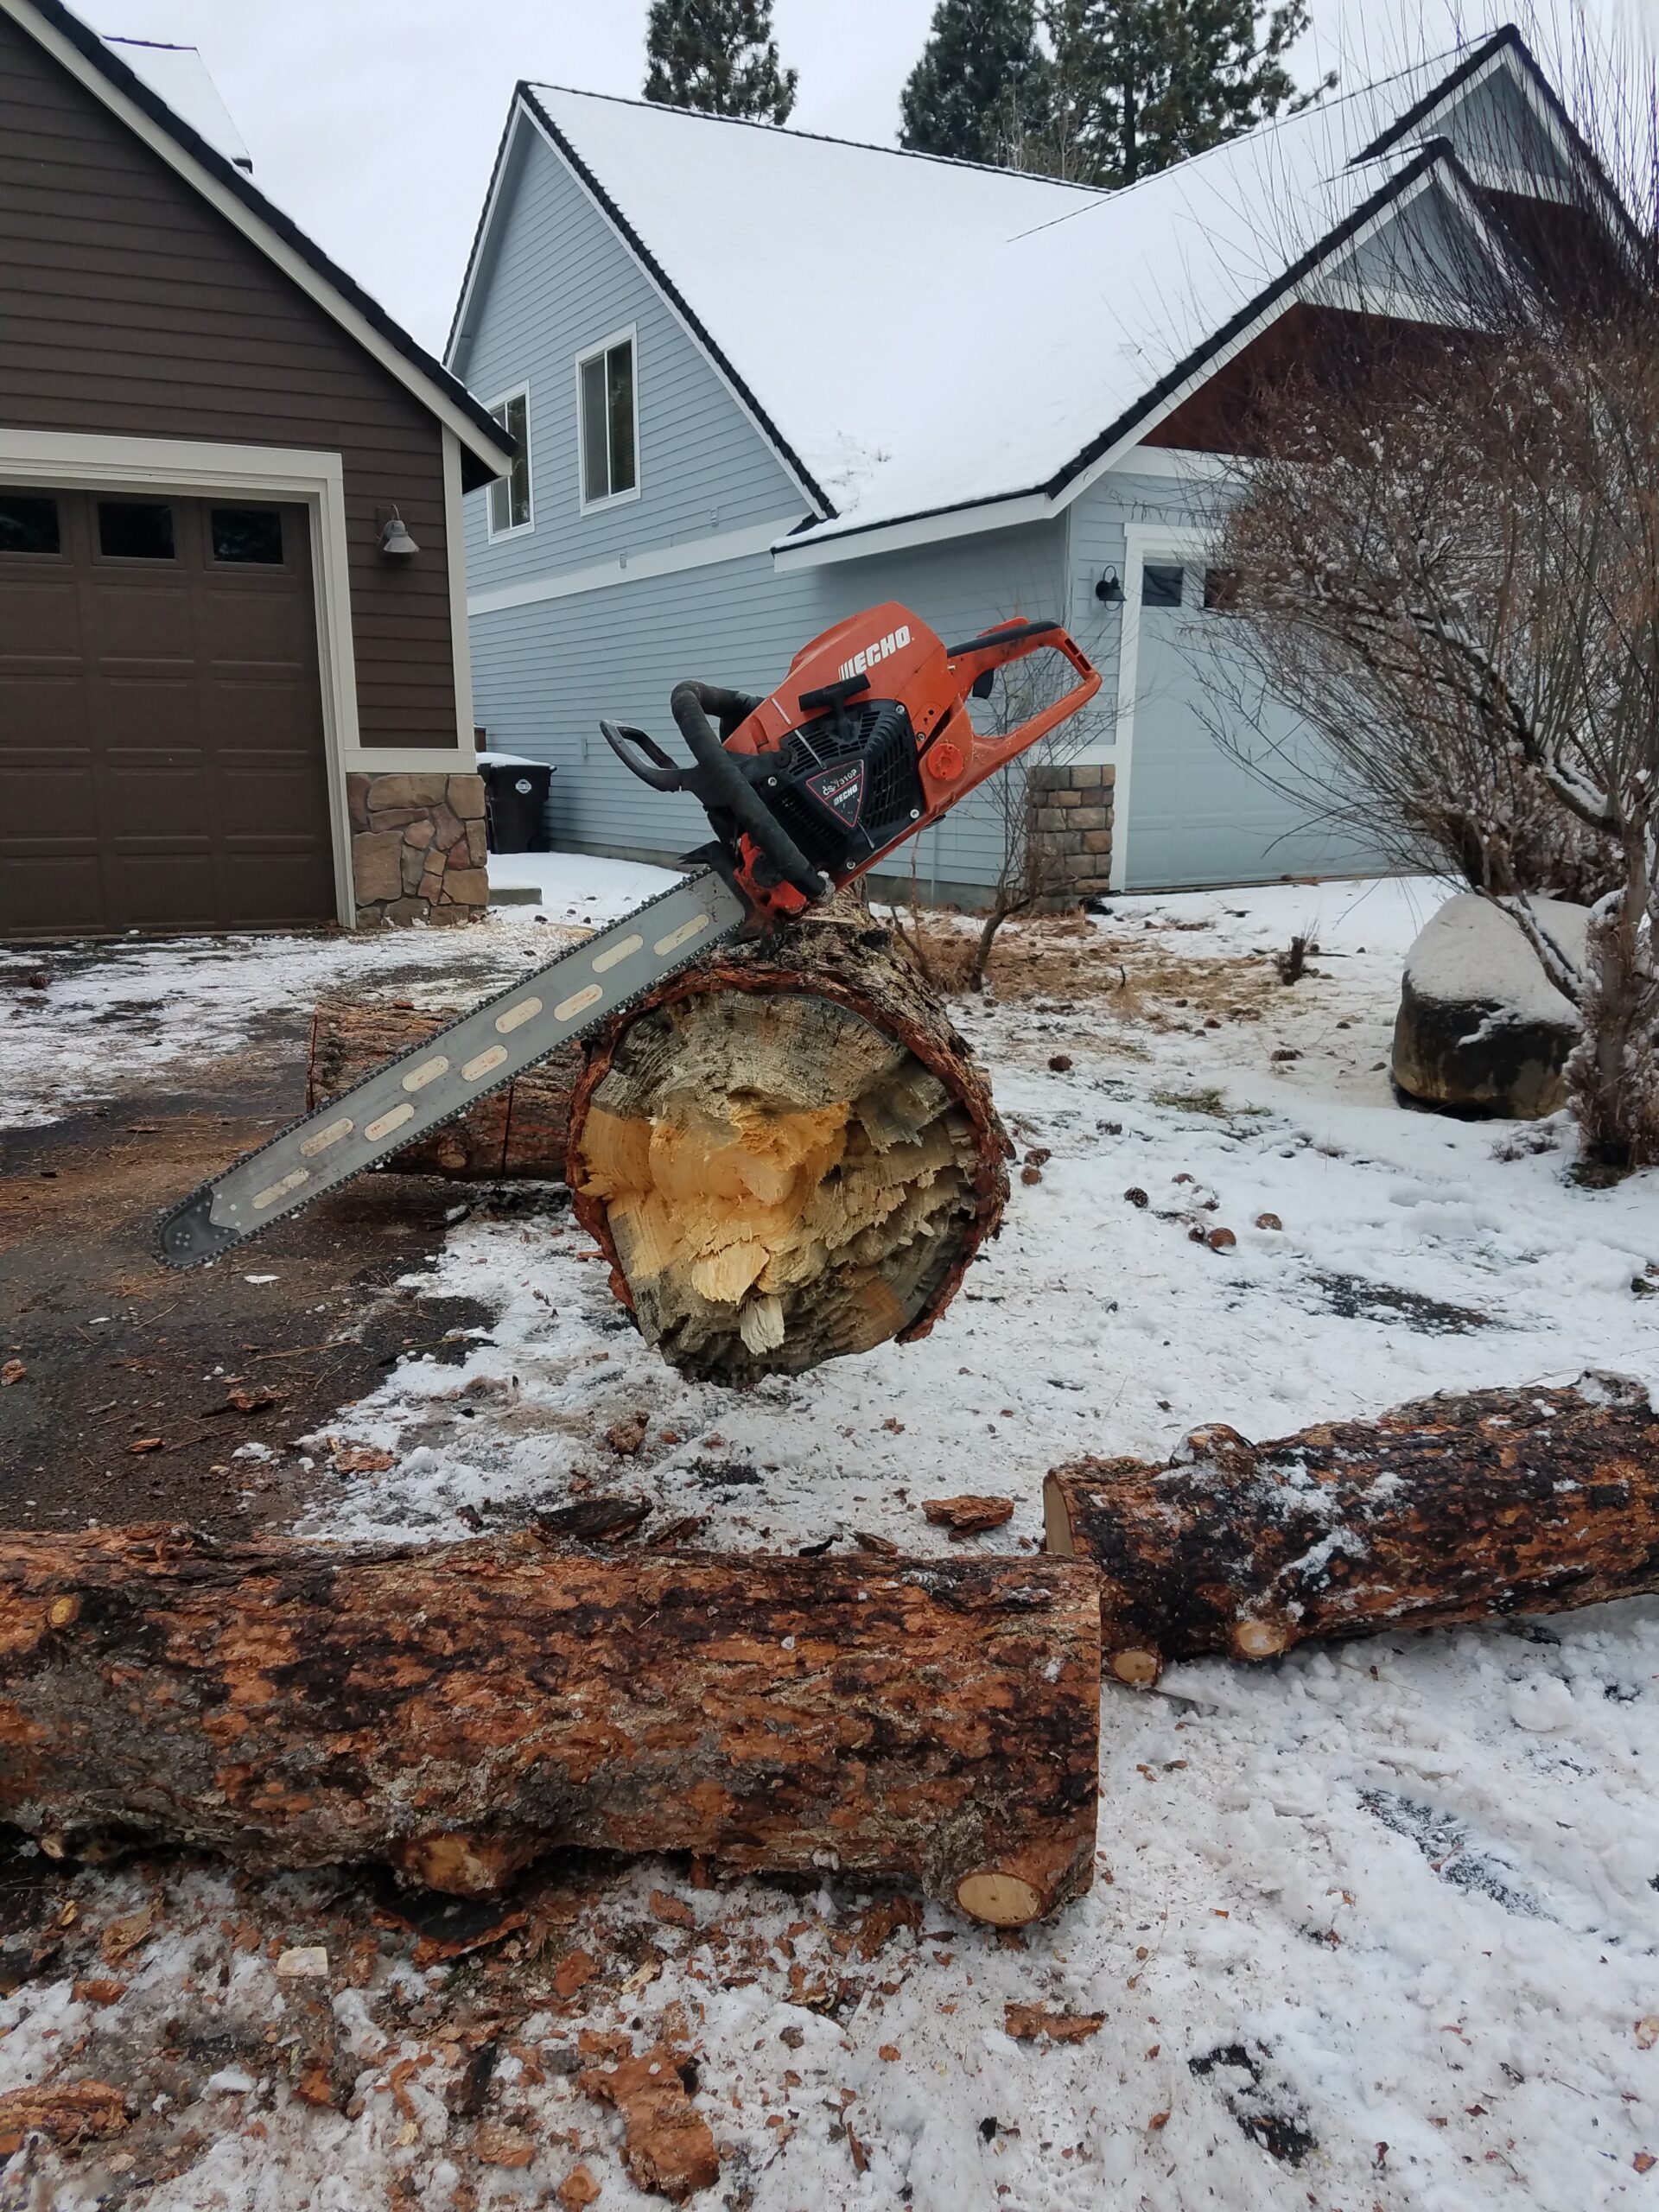 How much is my tree service going to cost?